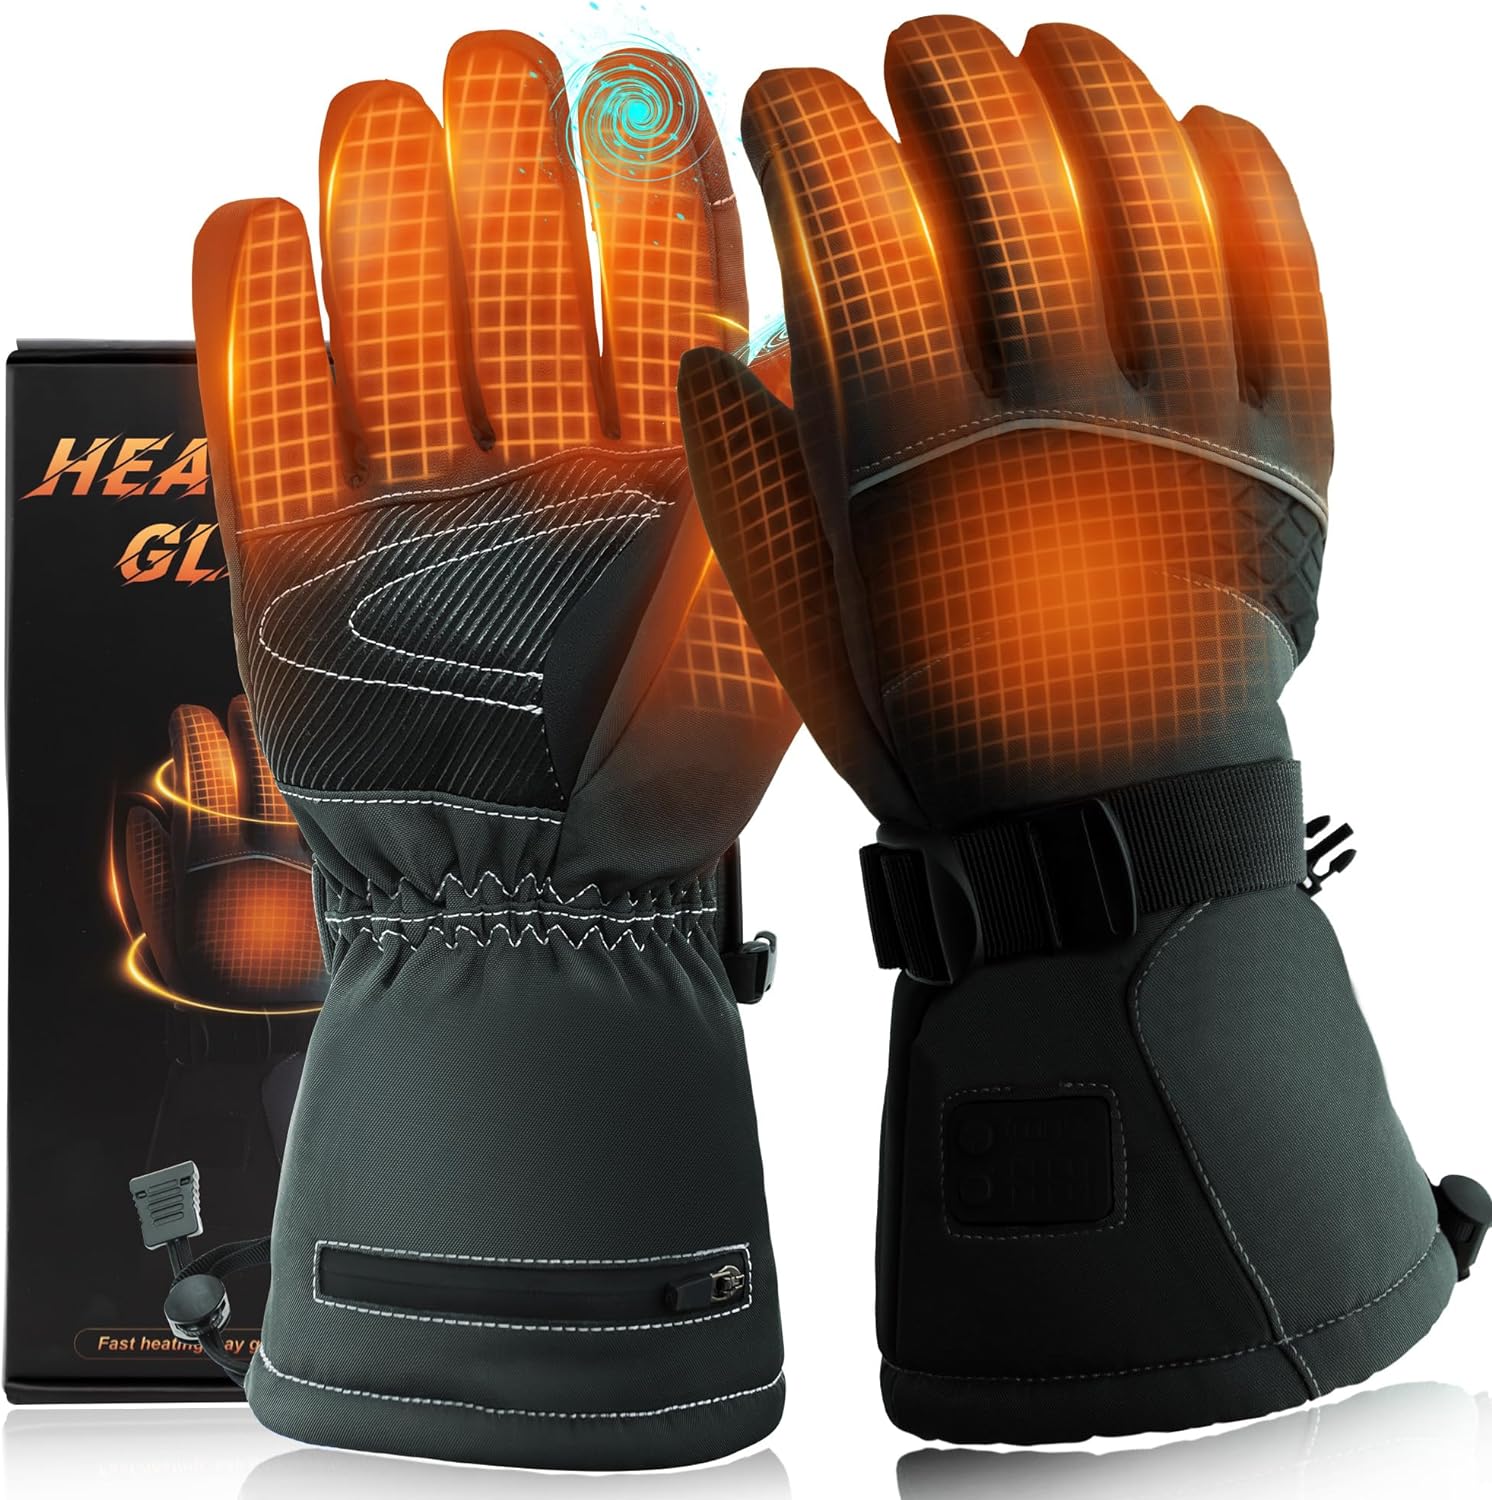 Heated Gloves,Heated Gloves for Men Women，7.4V3200 mAh Battery,Electric Gloves Heated Rechargeable, Waterproof/Windproof Heated Work Gloves, Ideal for Outdoor Work,Cycling, Skiing,Hiking. 【Upgraded Heated Gloves】The heated gloves for men/Women have been fully upgraded, Each finger and back of the hand inside the heated gloves is covered with upgraded heating wires, which heat up quickly in a few seconds. Windproof and waterproof electric heating gloves bring you a super comfortable wearing experience and keep your hands warm and dry in rain and snow.【Long-Lasting Warmth & 5 Heat Setting】：Heated gloves with 7.4V 3200mah rechargeable battery can last up to 7 hours of work after a full charge. Long press the power button to activate the heated gloves, 5 temperatures for you to choose, meet your needs in different weather，Low Temperature 113°F ~High Temperature 149°F，You can easily check the remaining power by using the power display on your motorcycle's heated glove.【Mens Winter Gloves With Touchscreen & Anti-slip PU Palm】The rechargeable heating gloves for men and women have screen touch function，it’s convenient for you to use mobile phone, iPad, tablet PC, car screen or any smart devices.Heated ski gloves’ soft leather palm and curved fingers ensure non-slip, strong, and flexible grips.Adjustable elasticated wrist strap and anti-lost buckle drawcord keeps wind out, and a convenient hook helps with storage.【Best Gift in Winter】Heated gloves for men and women can help people with poor blood circulation and Raynaud's disease, and are ideal for various outdoor sports in cold or cold winters, especially suitable for running, cycling, hiking, camping, mountain climbing, skating, skiing, snowboarding, Ice fishing, hunting, snow clearing, dog walking and more.It is the best gift for Christmas, Valentine's Day and other festivals. NOTE: Sizes are unisex.【What’s in Package】:1 pair of heated gloves/2*lithium battery/1*using manual/1*laundry bag/1*Charger ,and the heating effect of this heated gloves depends on the battery using,use the rechargeable li-ion batteries,the heating effect will be better.